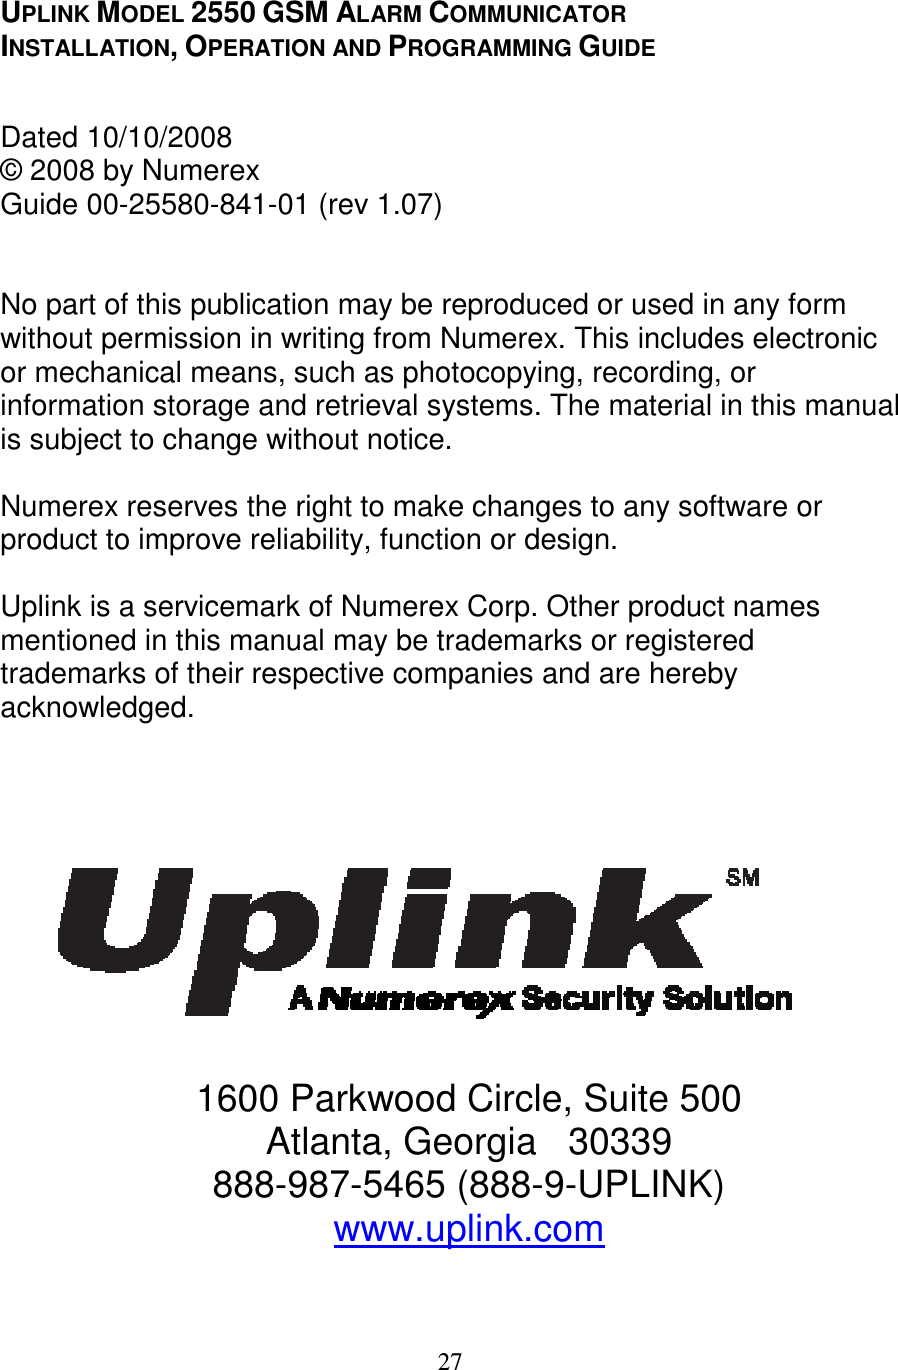   27   UPLINK MODEL 2550 GSM ALARM COMMUNICATOR INSTALLATION, OPERATION AND PROGRAMMING GUIDE   Dated 10/10/2008  © 2008 by Numerex  Guide 00-25580-841-01 (rev 1.07)   No part of this publication may be reproduced or used in any form without permission in writing from Numerex. This includes electronic or mechanical means, such as photocopying, recording, or information storage and retrieval systems. The material in this manual is subject to change without notice.   Numerex reserves the right to make changes to any software or product to improve reliability, function or design.   Uplink is a servicemark of Numerex Corp. Other product names mentioned in this manual may be trademarks or registered trademarks of their respective companies and are hereby acknowledged.       1600 Parkwood Circle, Suite 500 Atlanta, Georgia   30339 888-987-5465 (888-9-UPLINK) www.uplink.com  